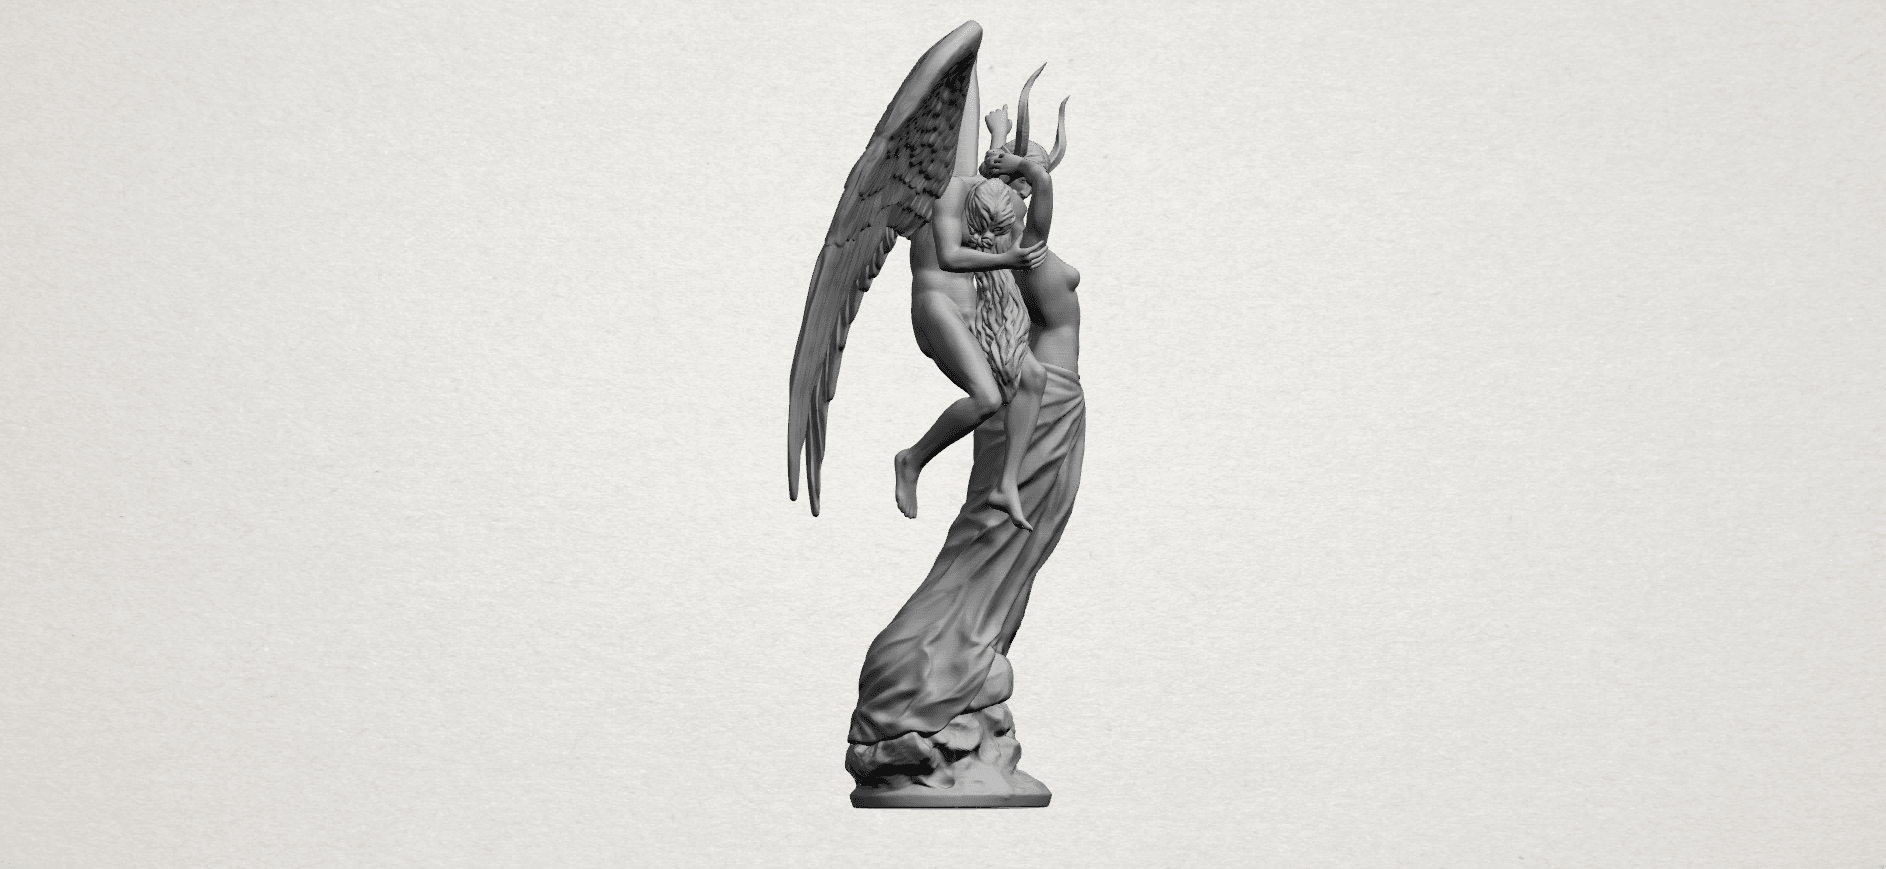 Angel and devil - A12.png Download free STL file Angel and devil • 3D printable object, GeorgesNikkei